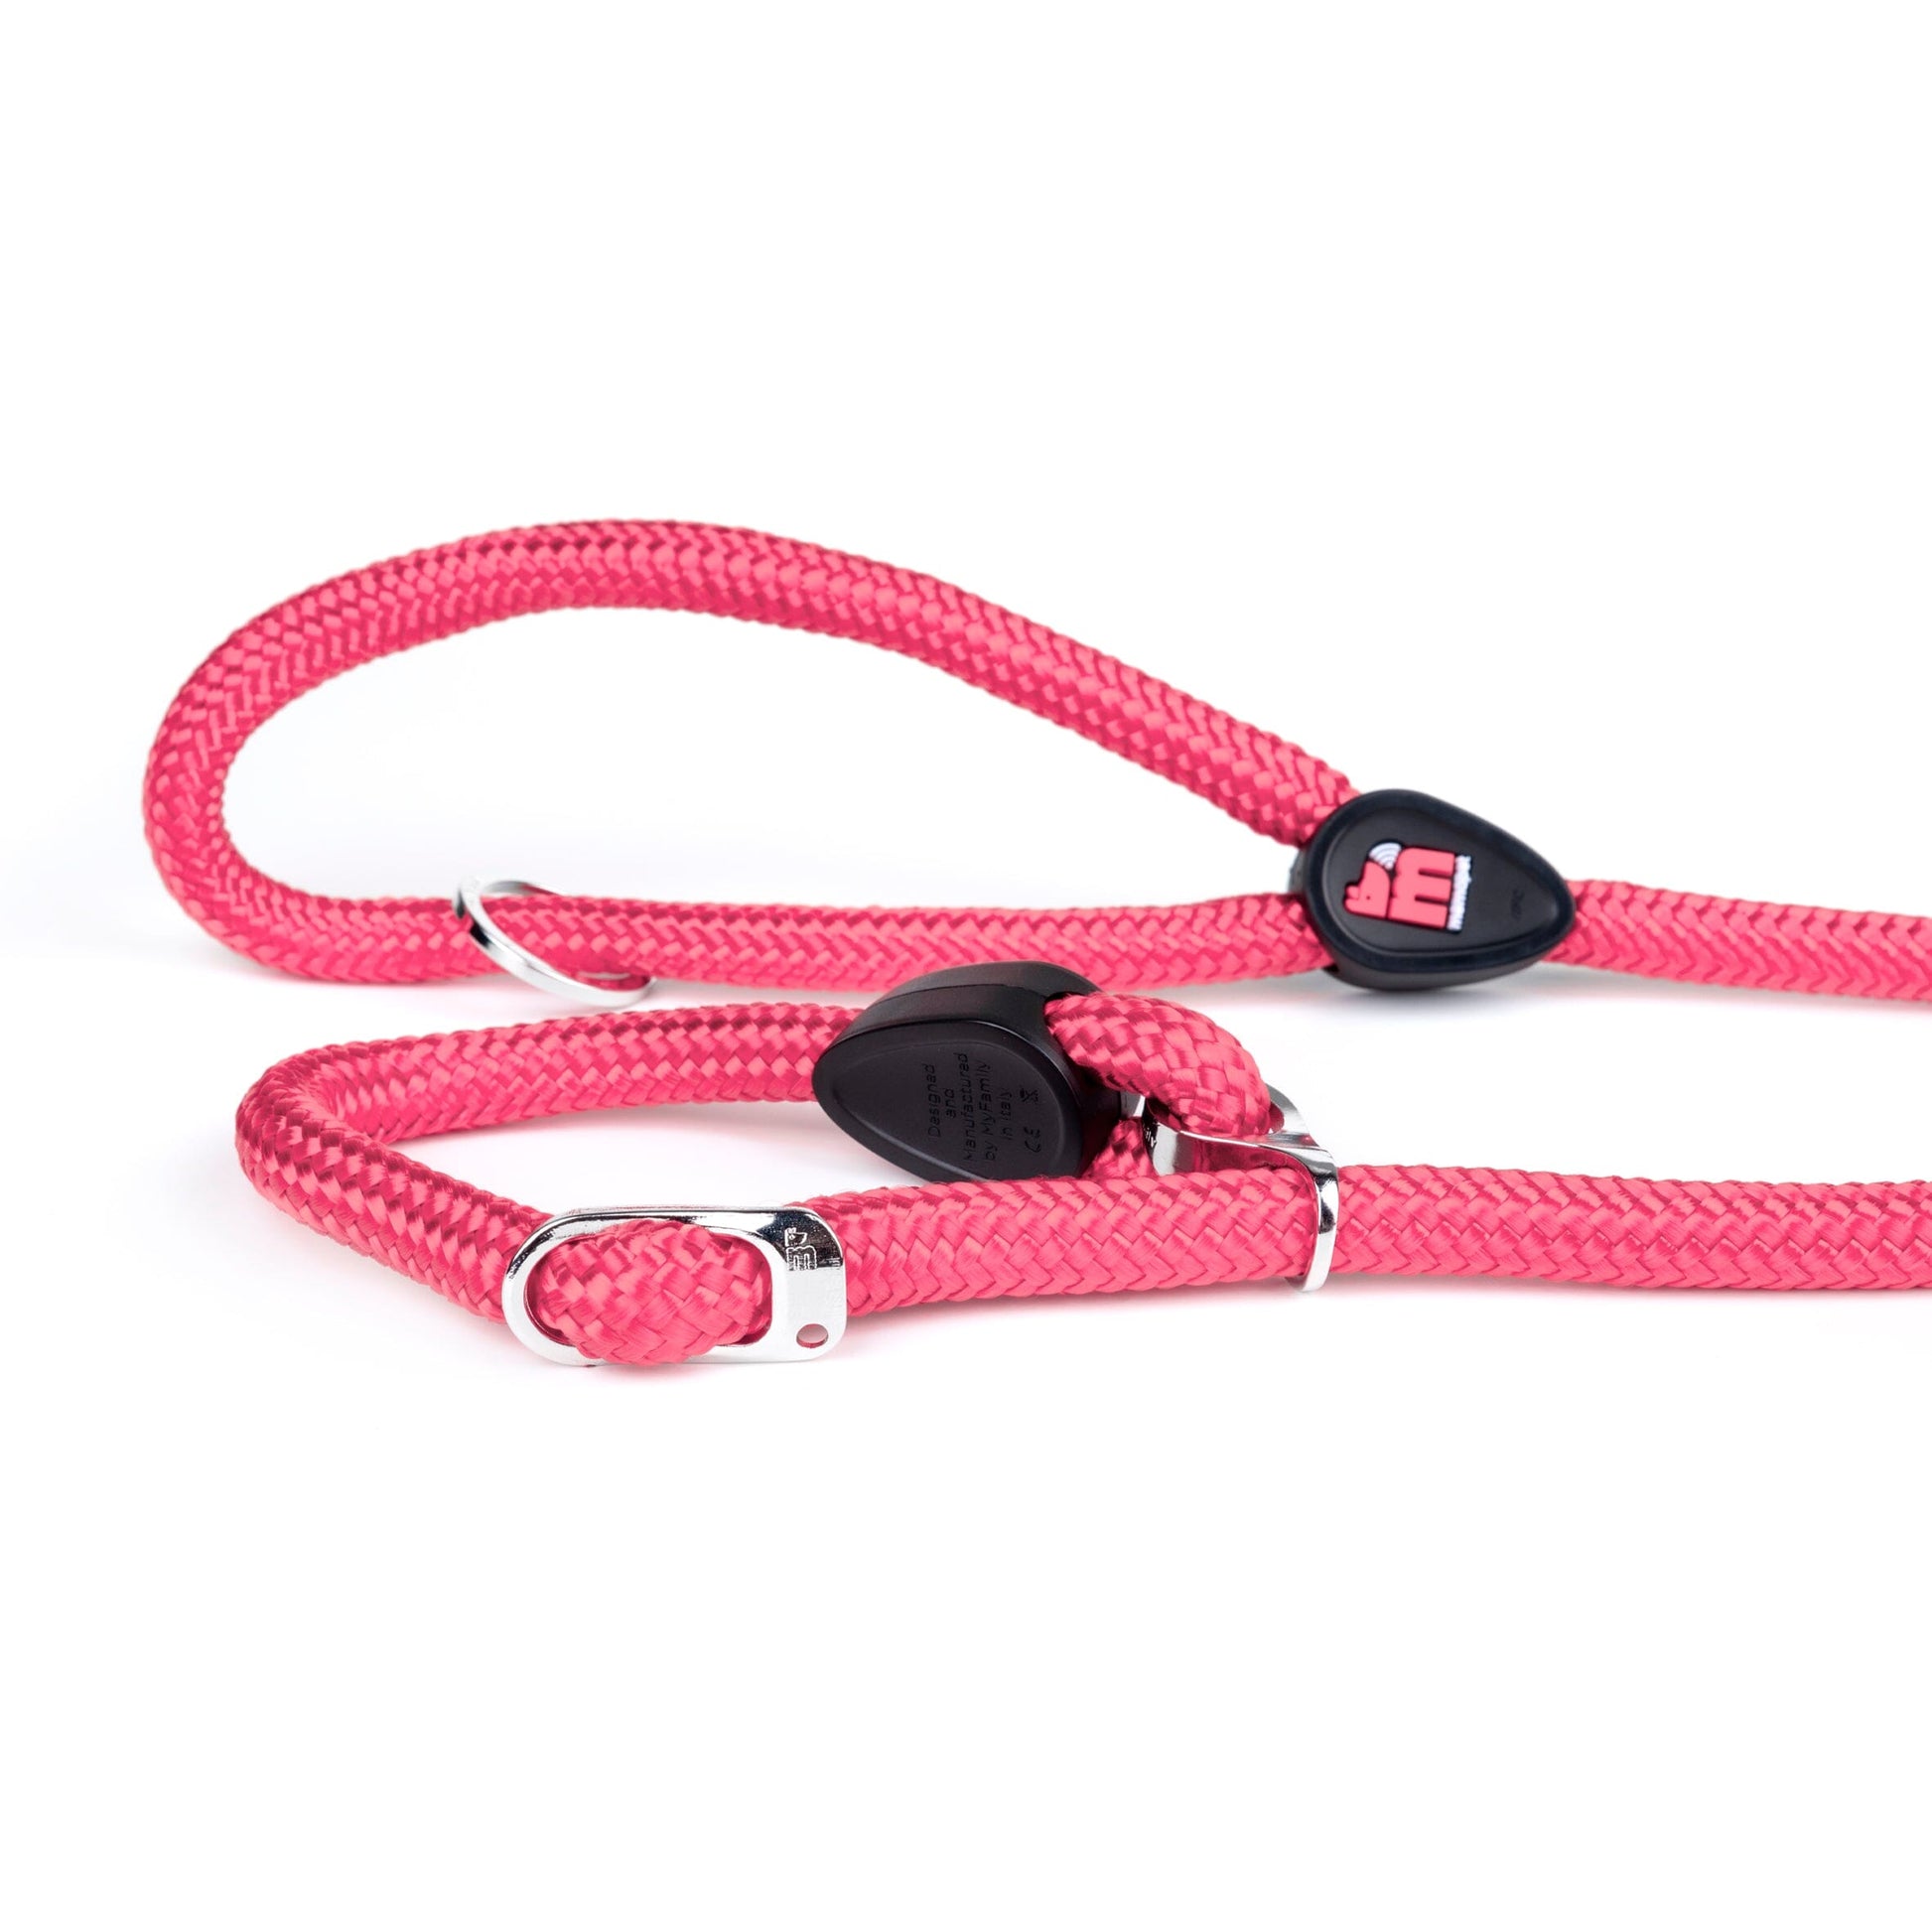 Memopet Dog Training Collar and Rope Leash 2in1 With Activity Tracking Device and Digital ID Pet Supplies My Family Medium Pink 